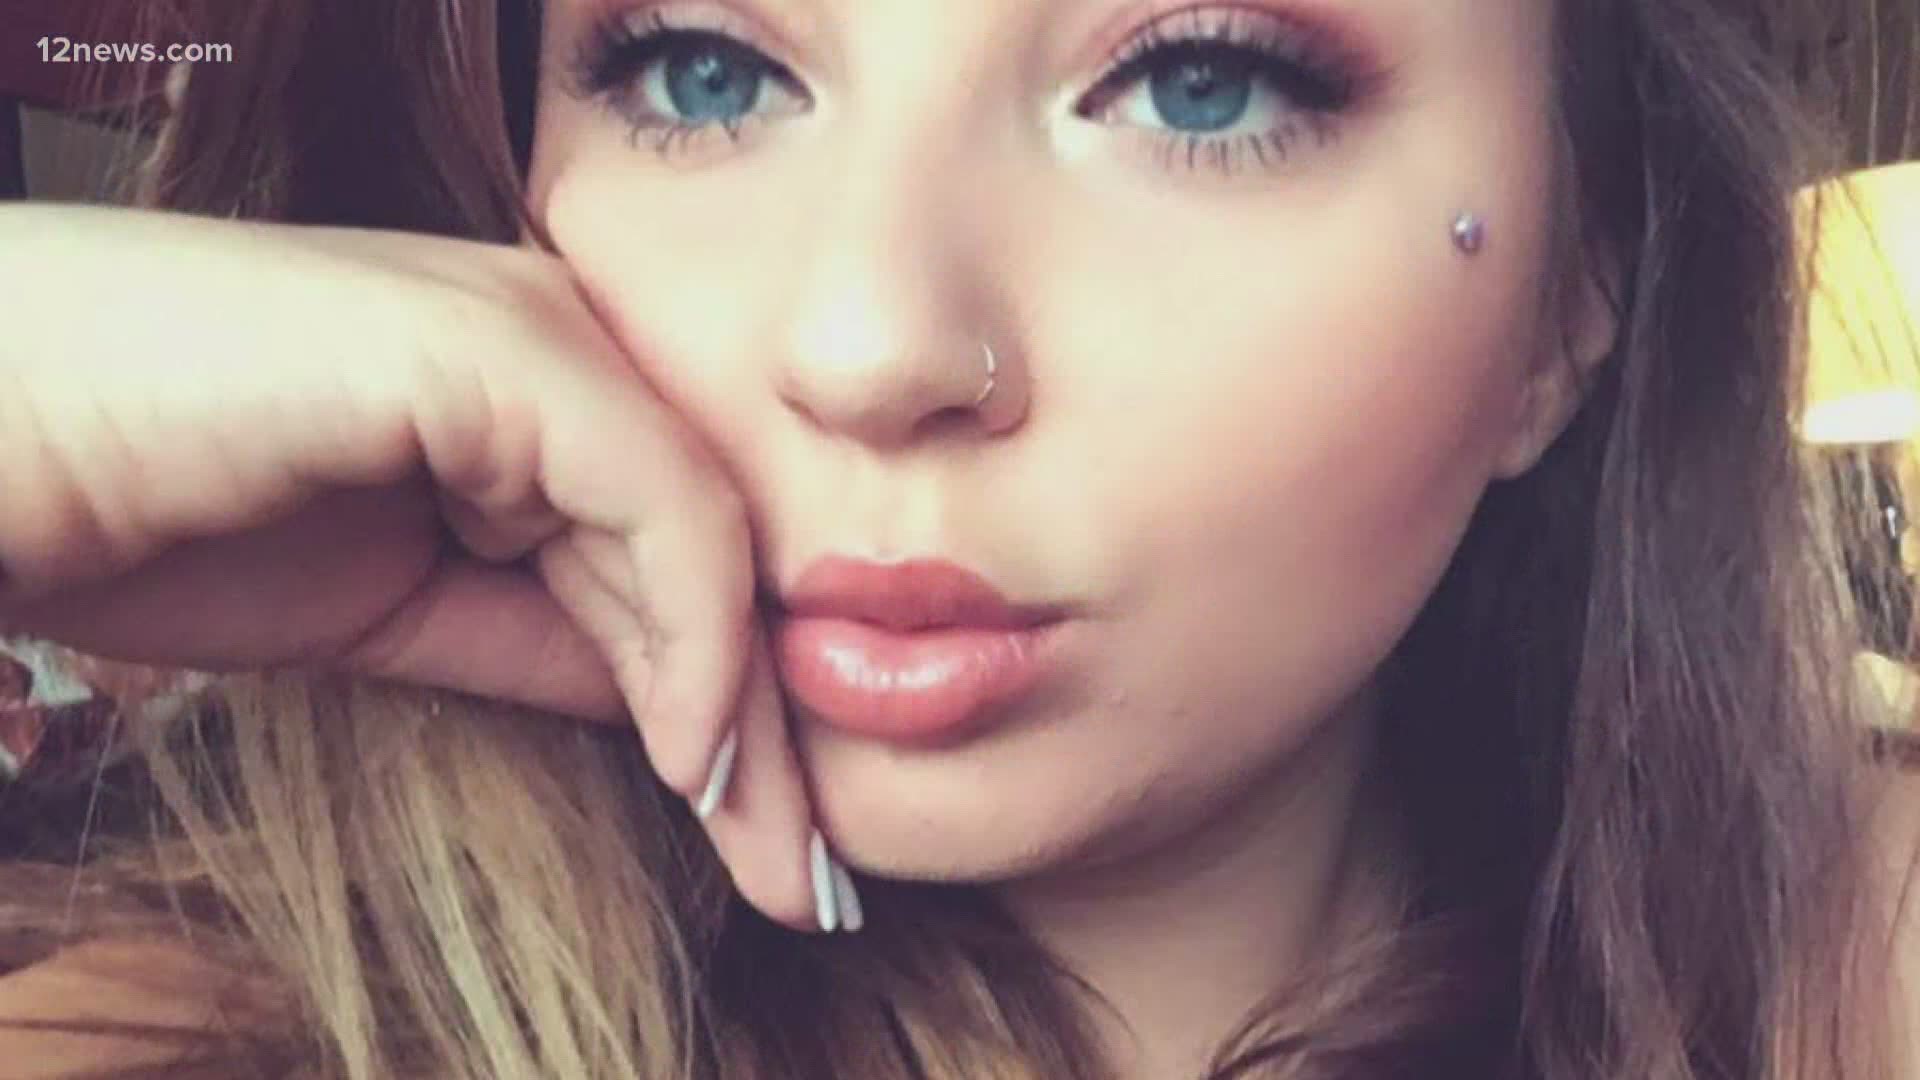 17-year-old Hannah is one of four teens that lost their life to fentanyl use in Yavapai County this year. Her parents are warning other parents about what can happen